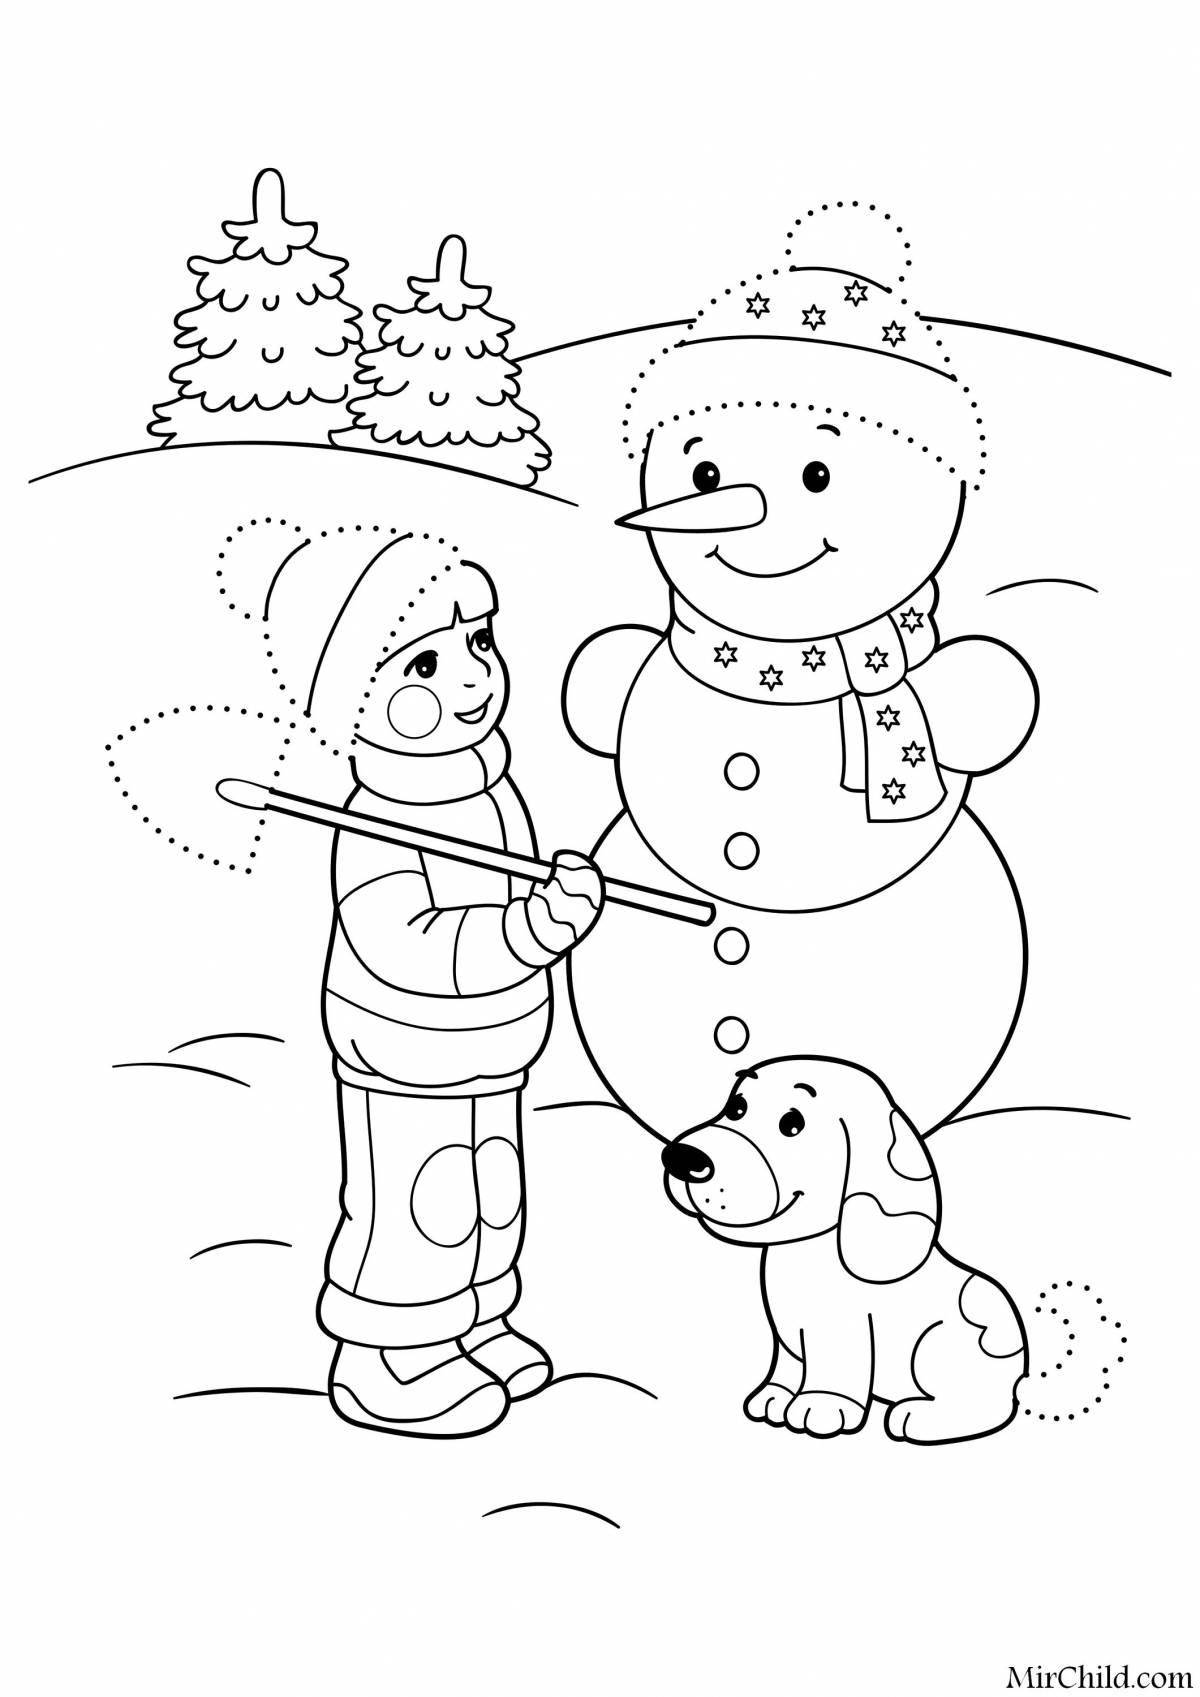 Coloring hare and snowman